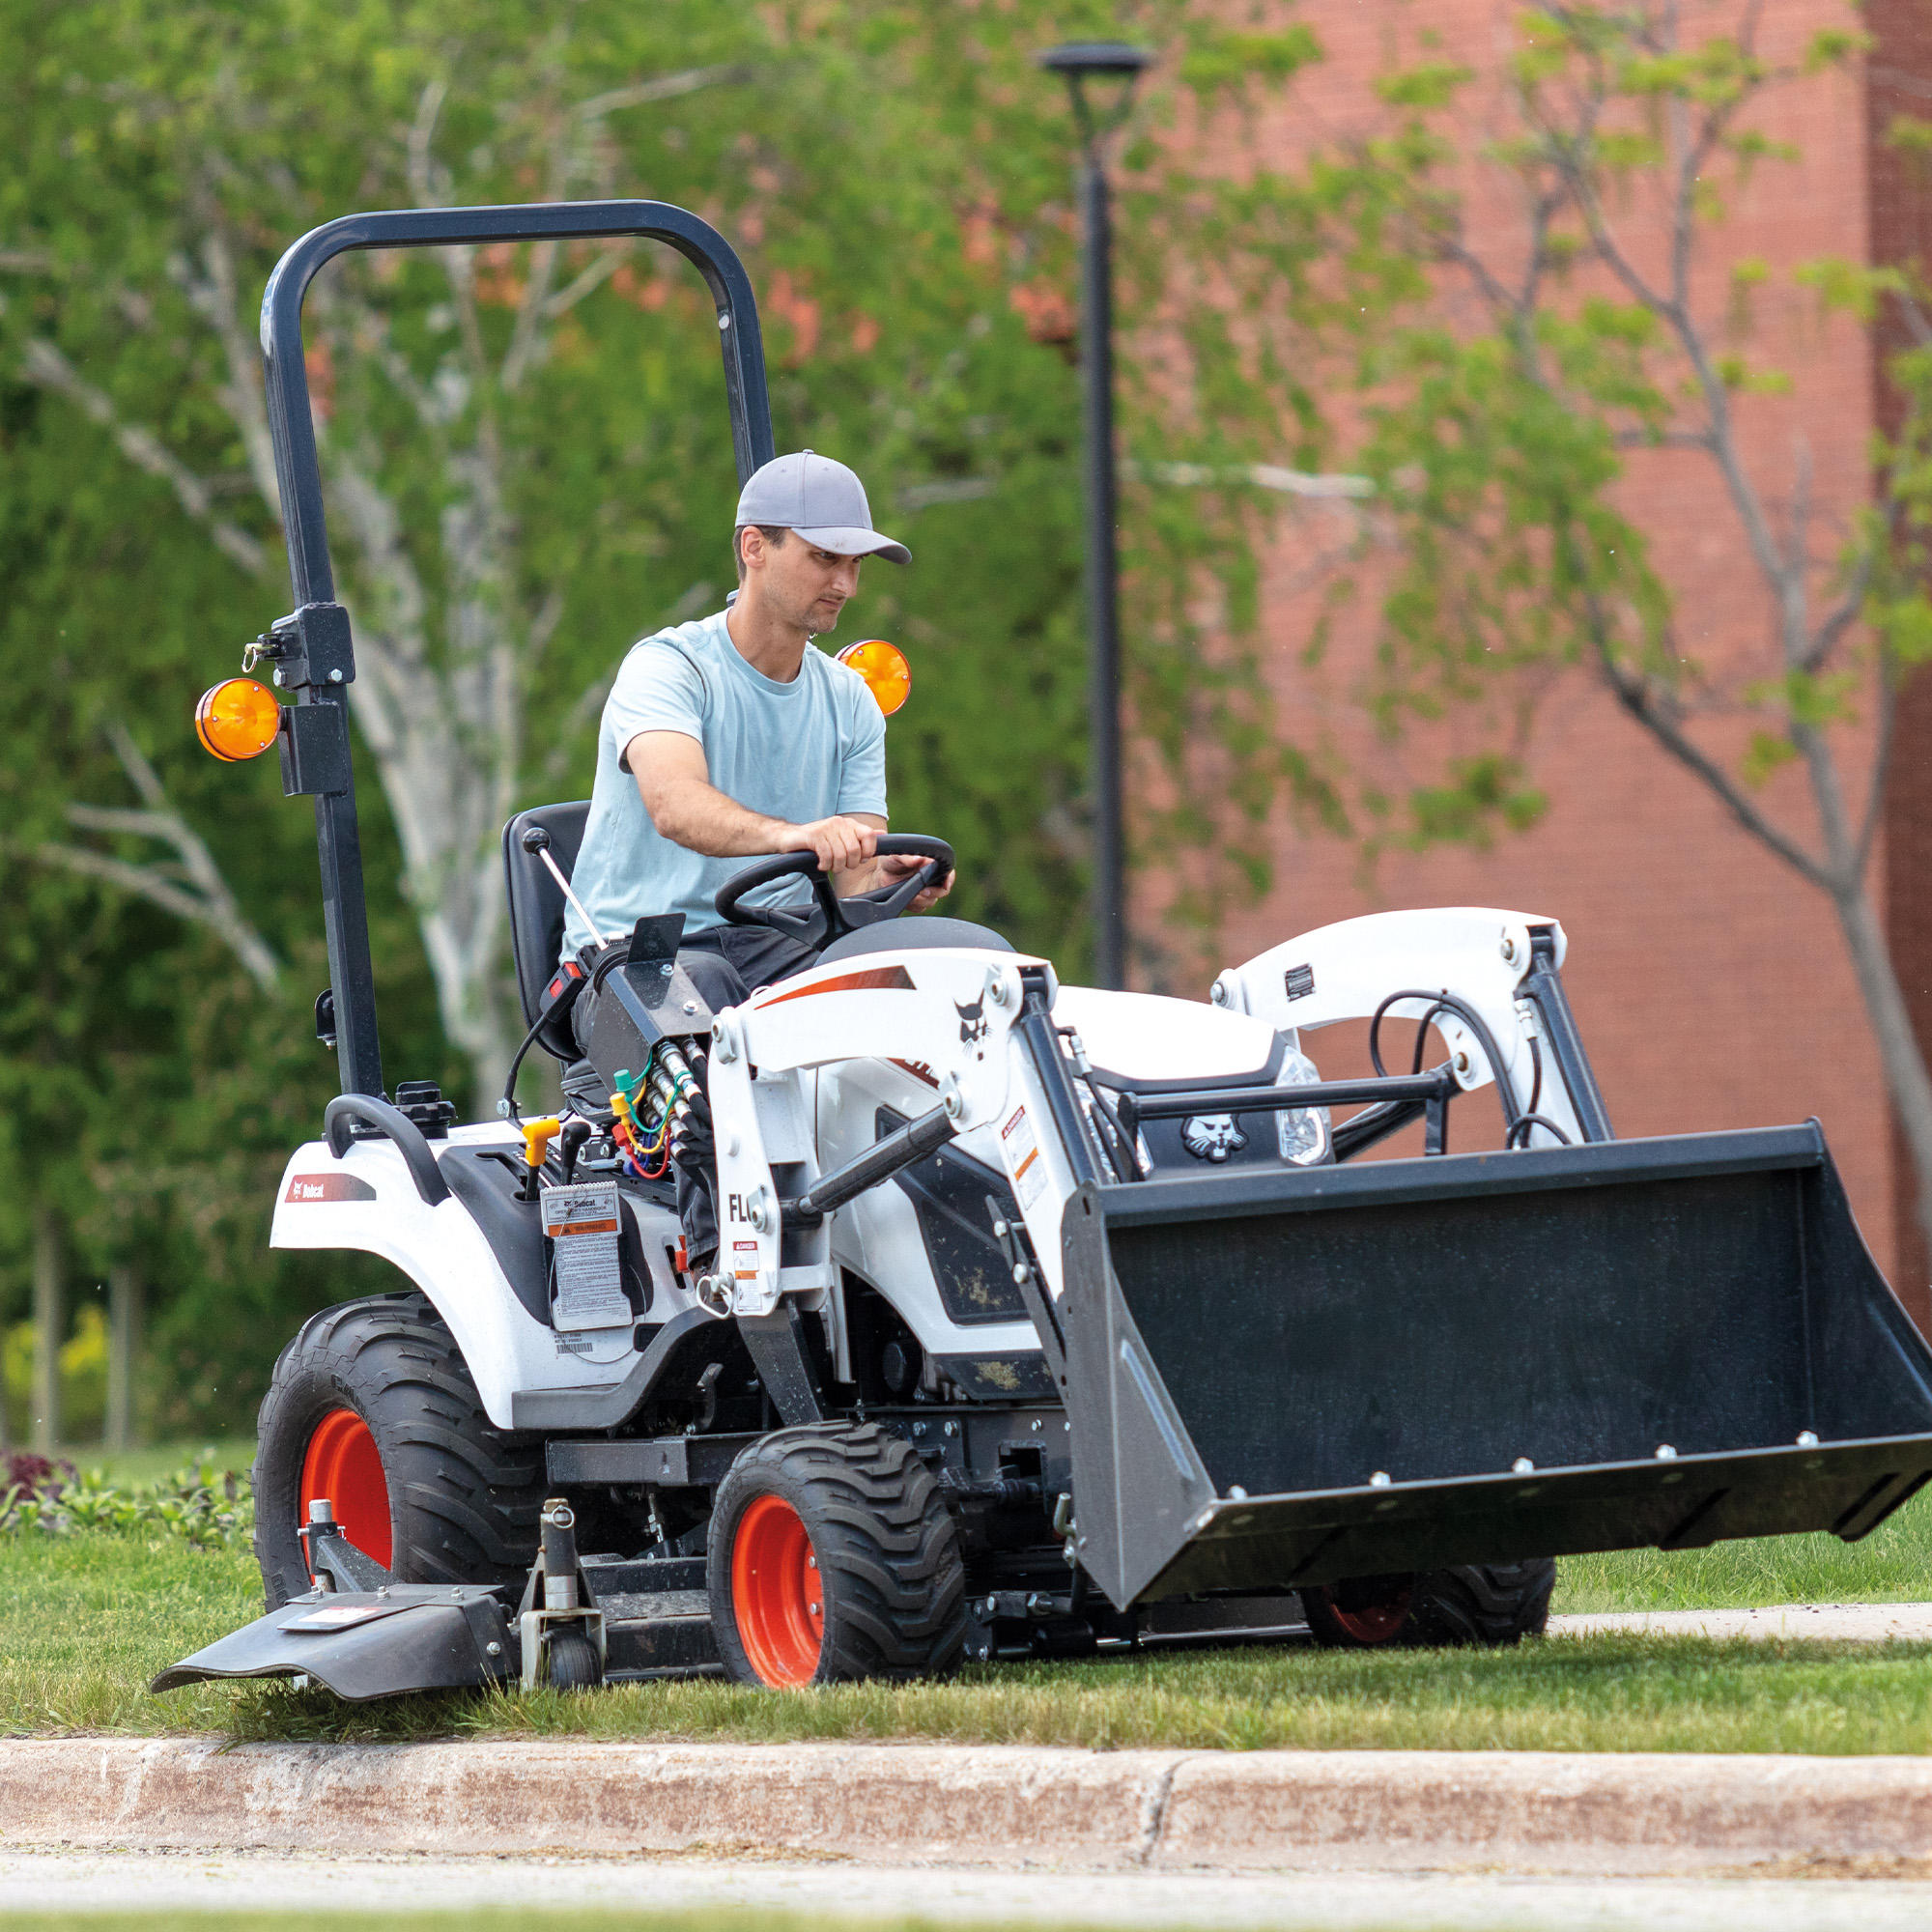 The Bobcat CT1025 with bucket and mid-mount mower Bobcat of Whitehorse Whitehorse (867)633-4426